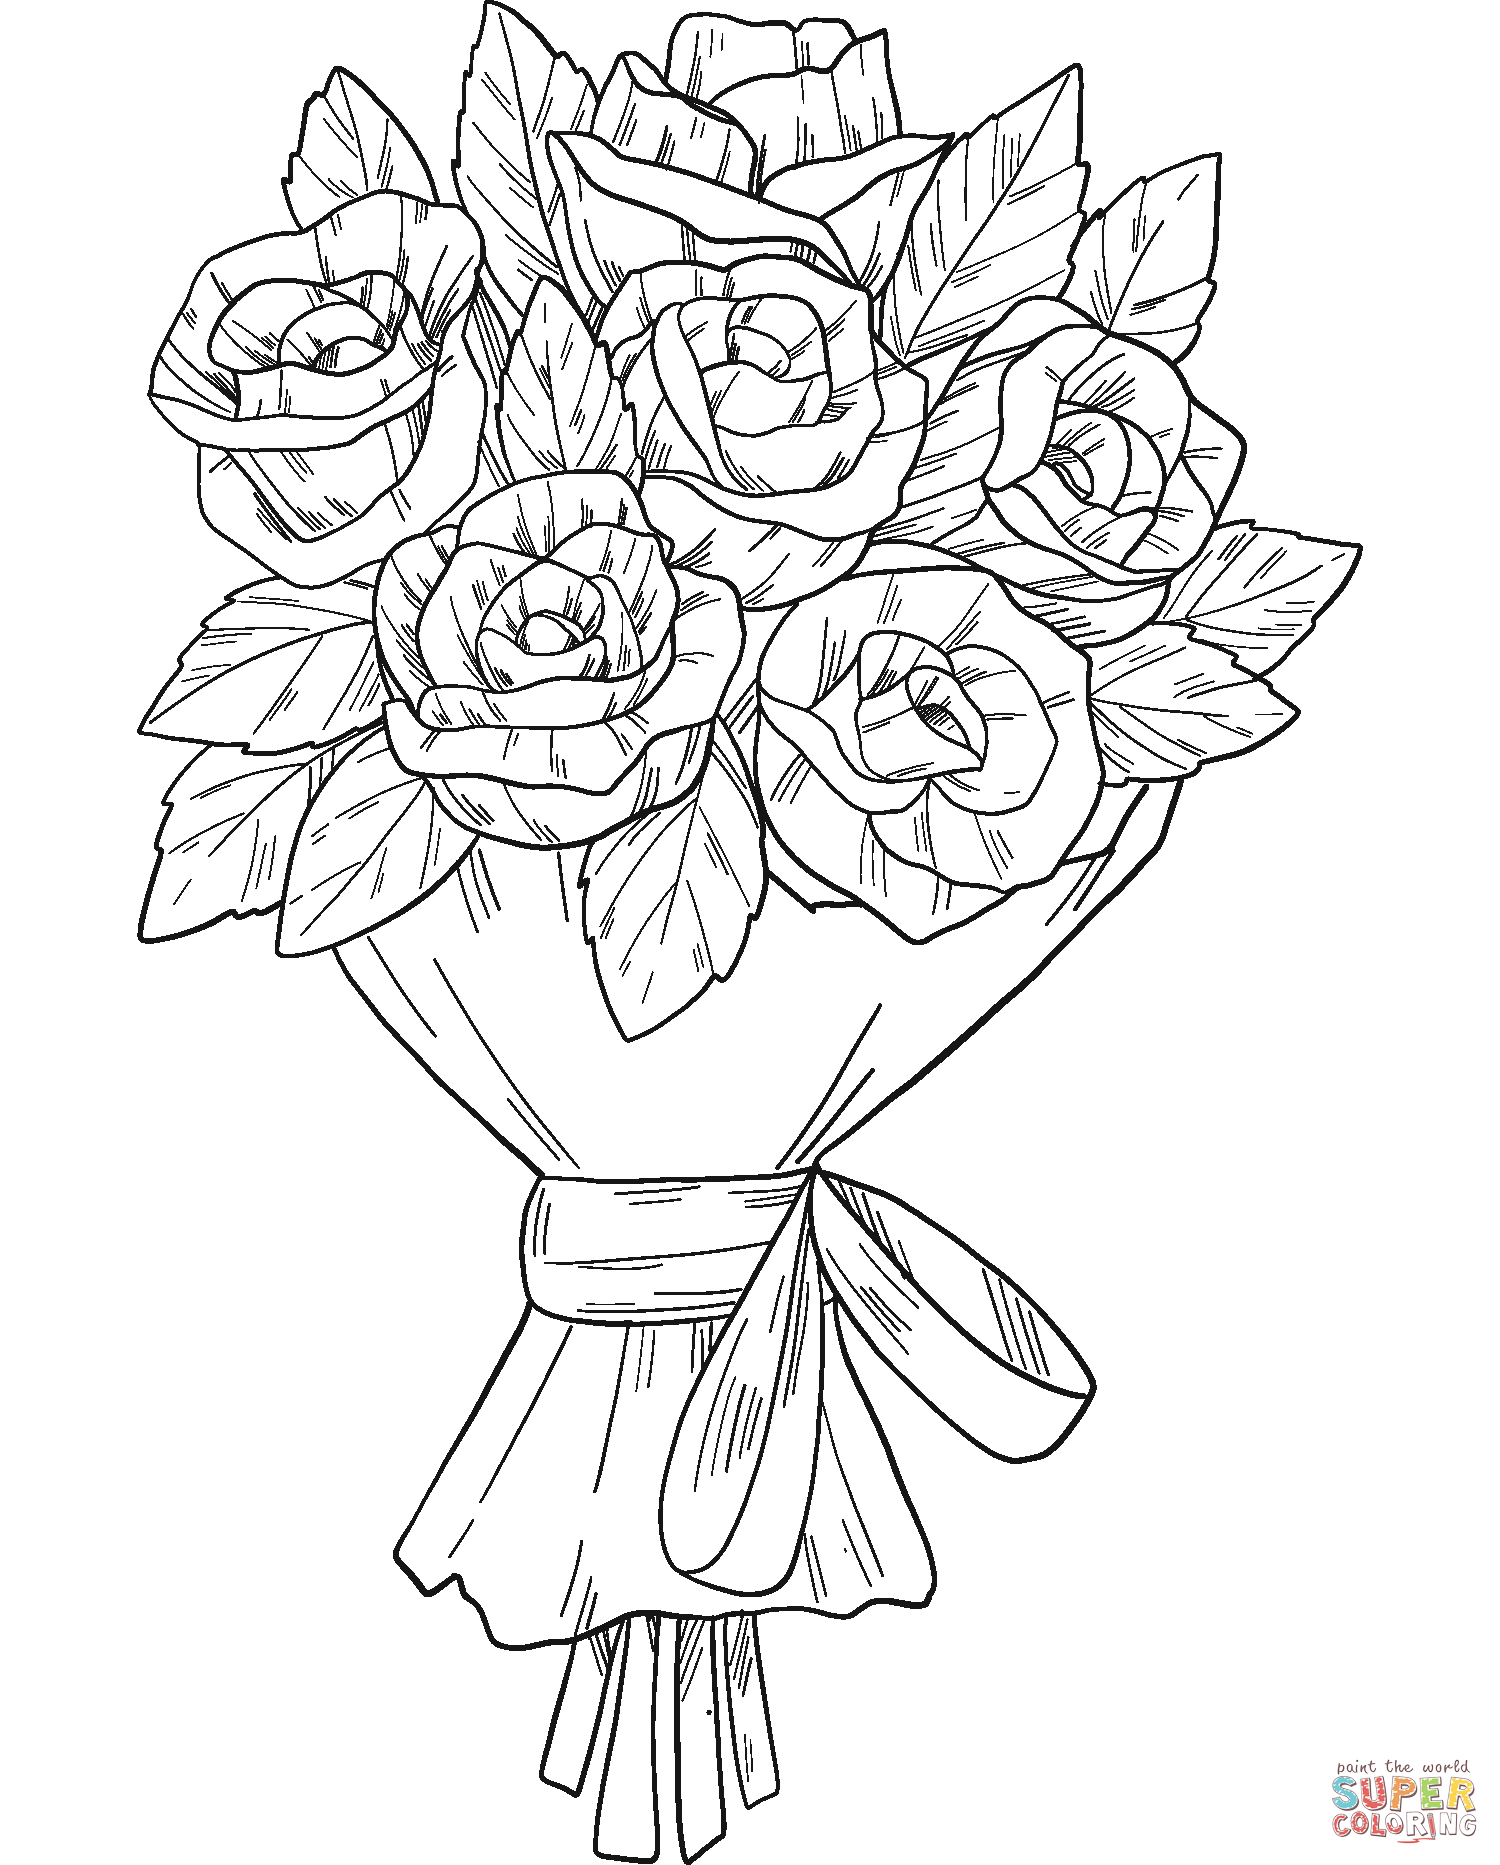 Bouquet of roses coloring page free printable coloring pages